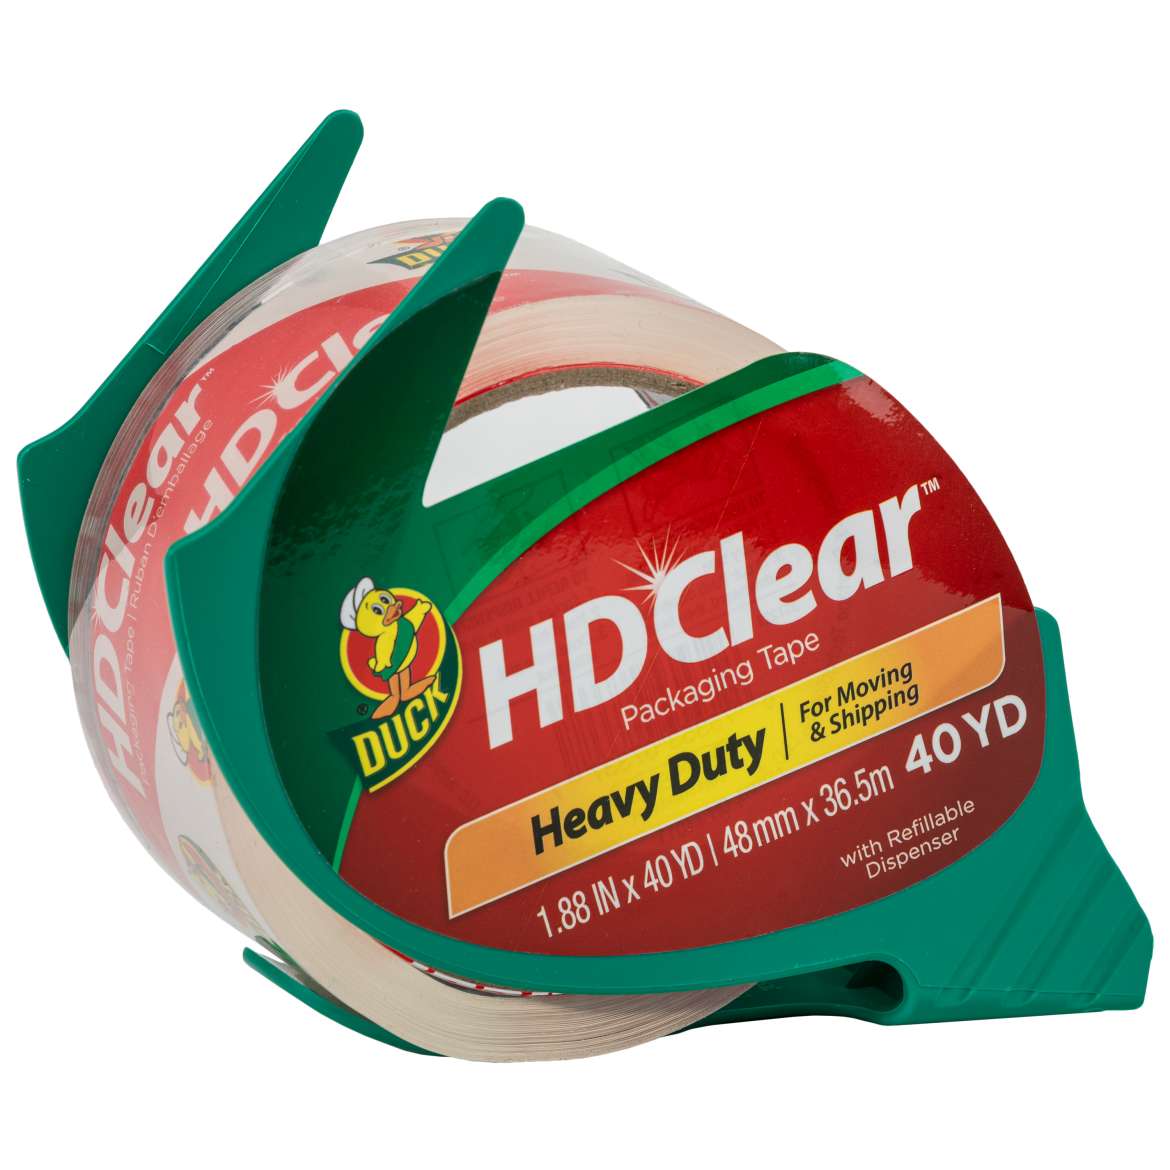 HD Clear™ Heavy Duty Packing Tape Image